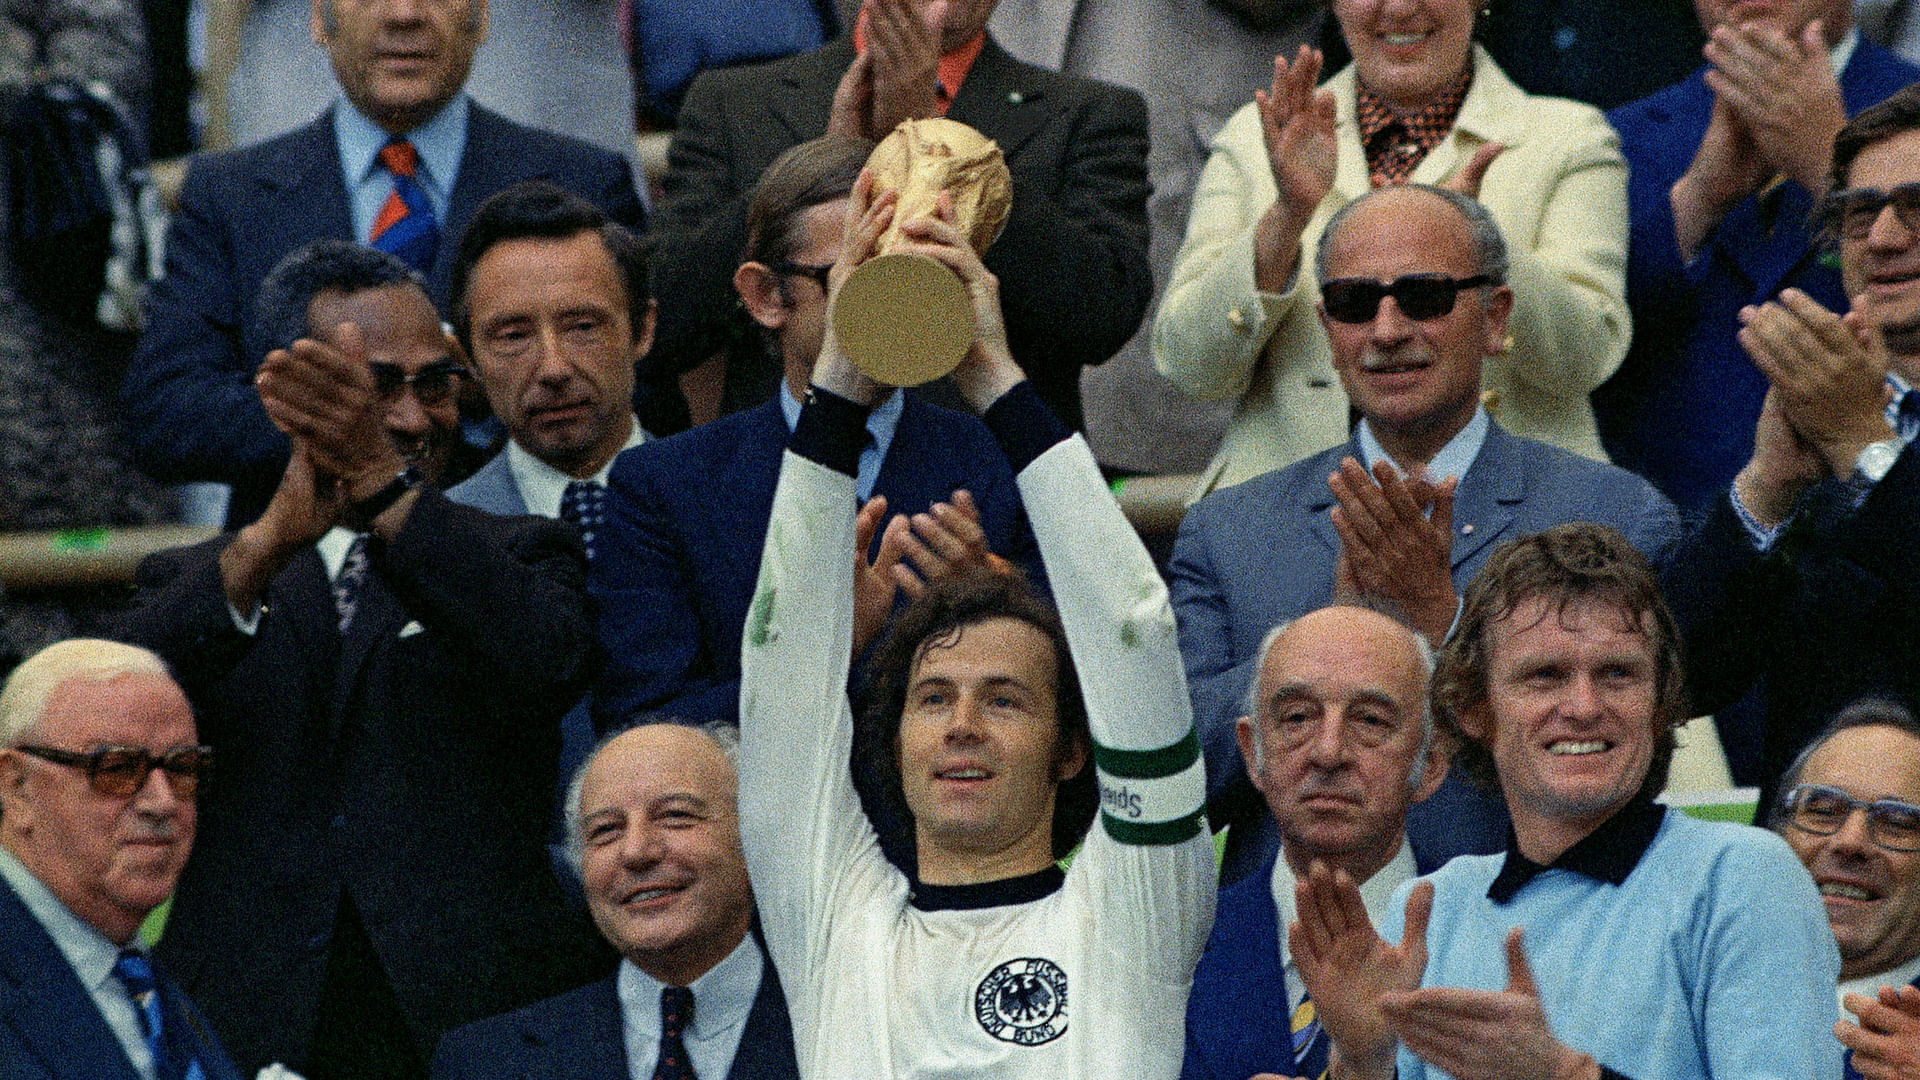 Franz Beckenbauer lifts the FIFA World Cup trophy as captain of the winning West Germany team in 1974.